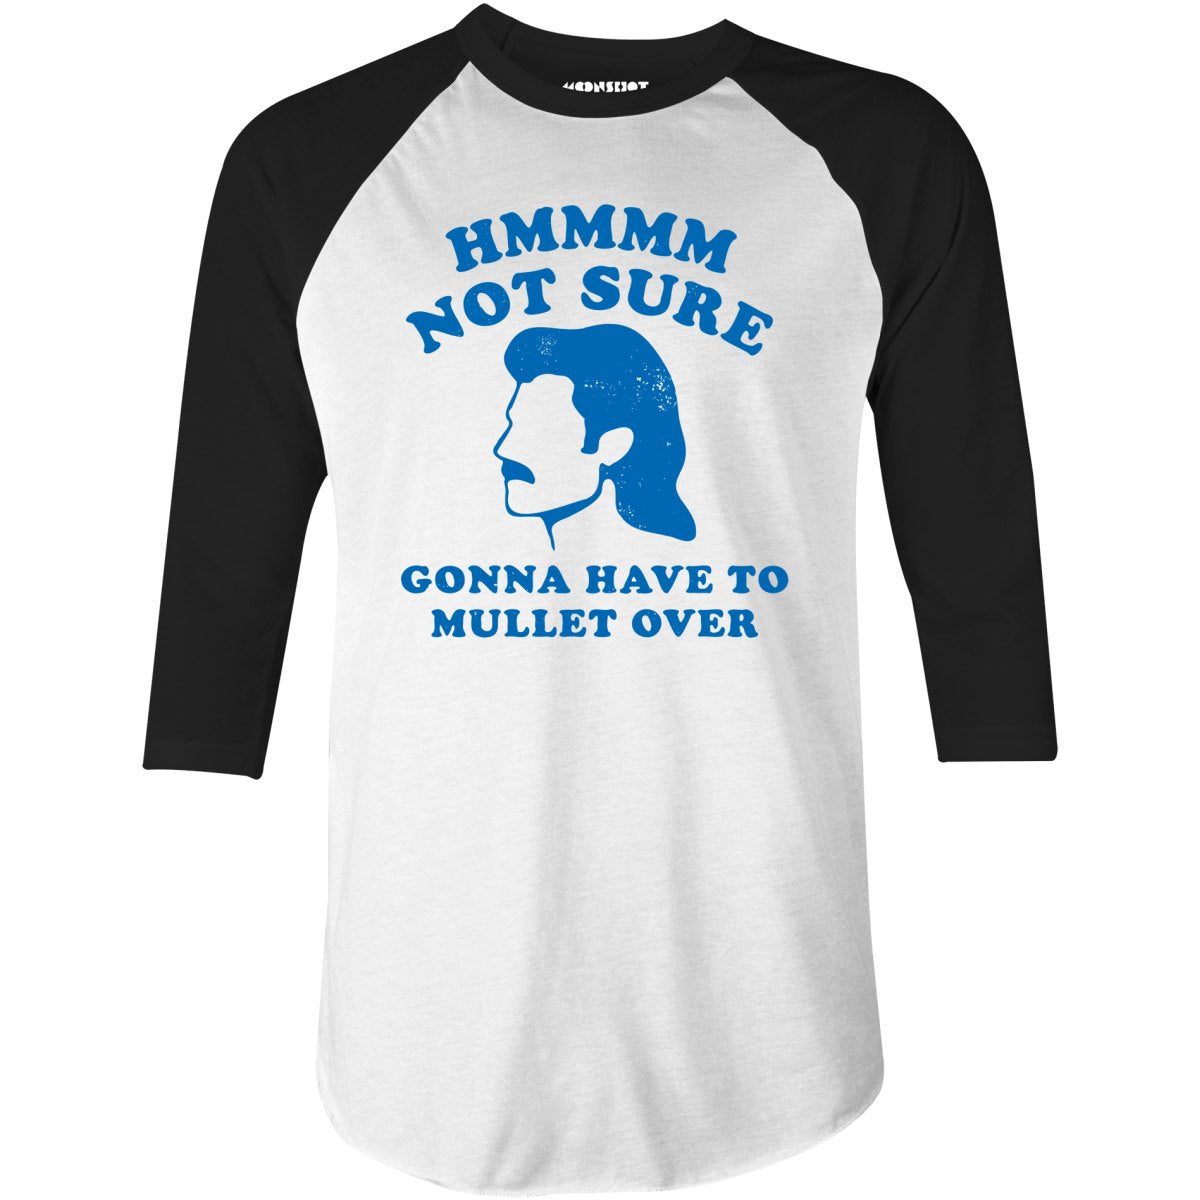 Gonna Have to Mullet Over - 3/4 Sleeve Raglan T-Shirt